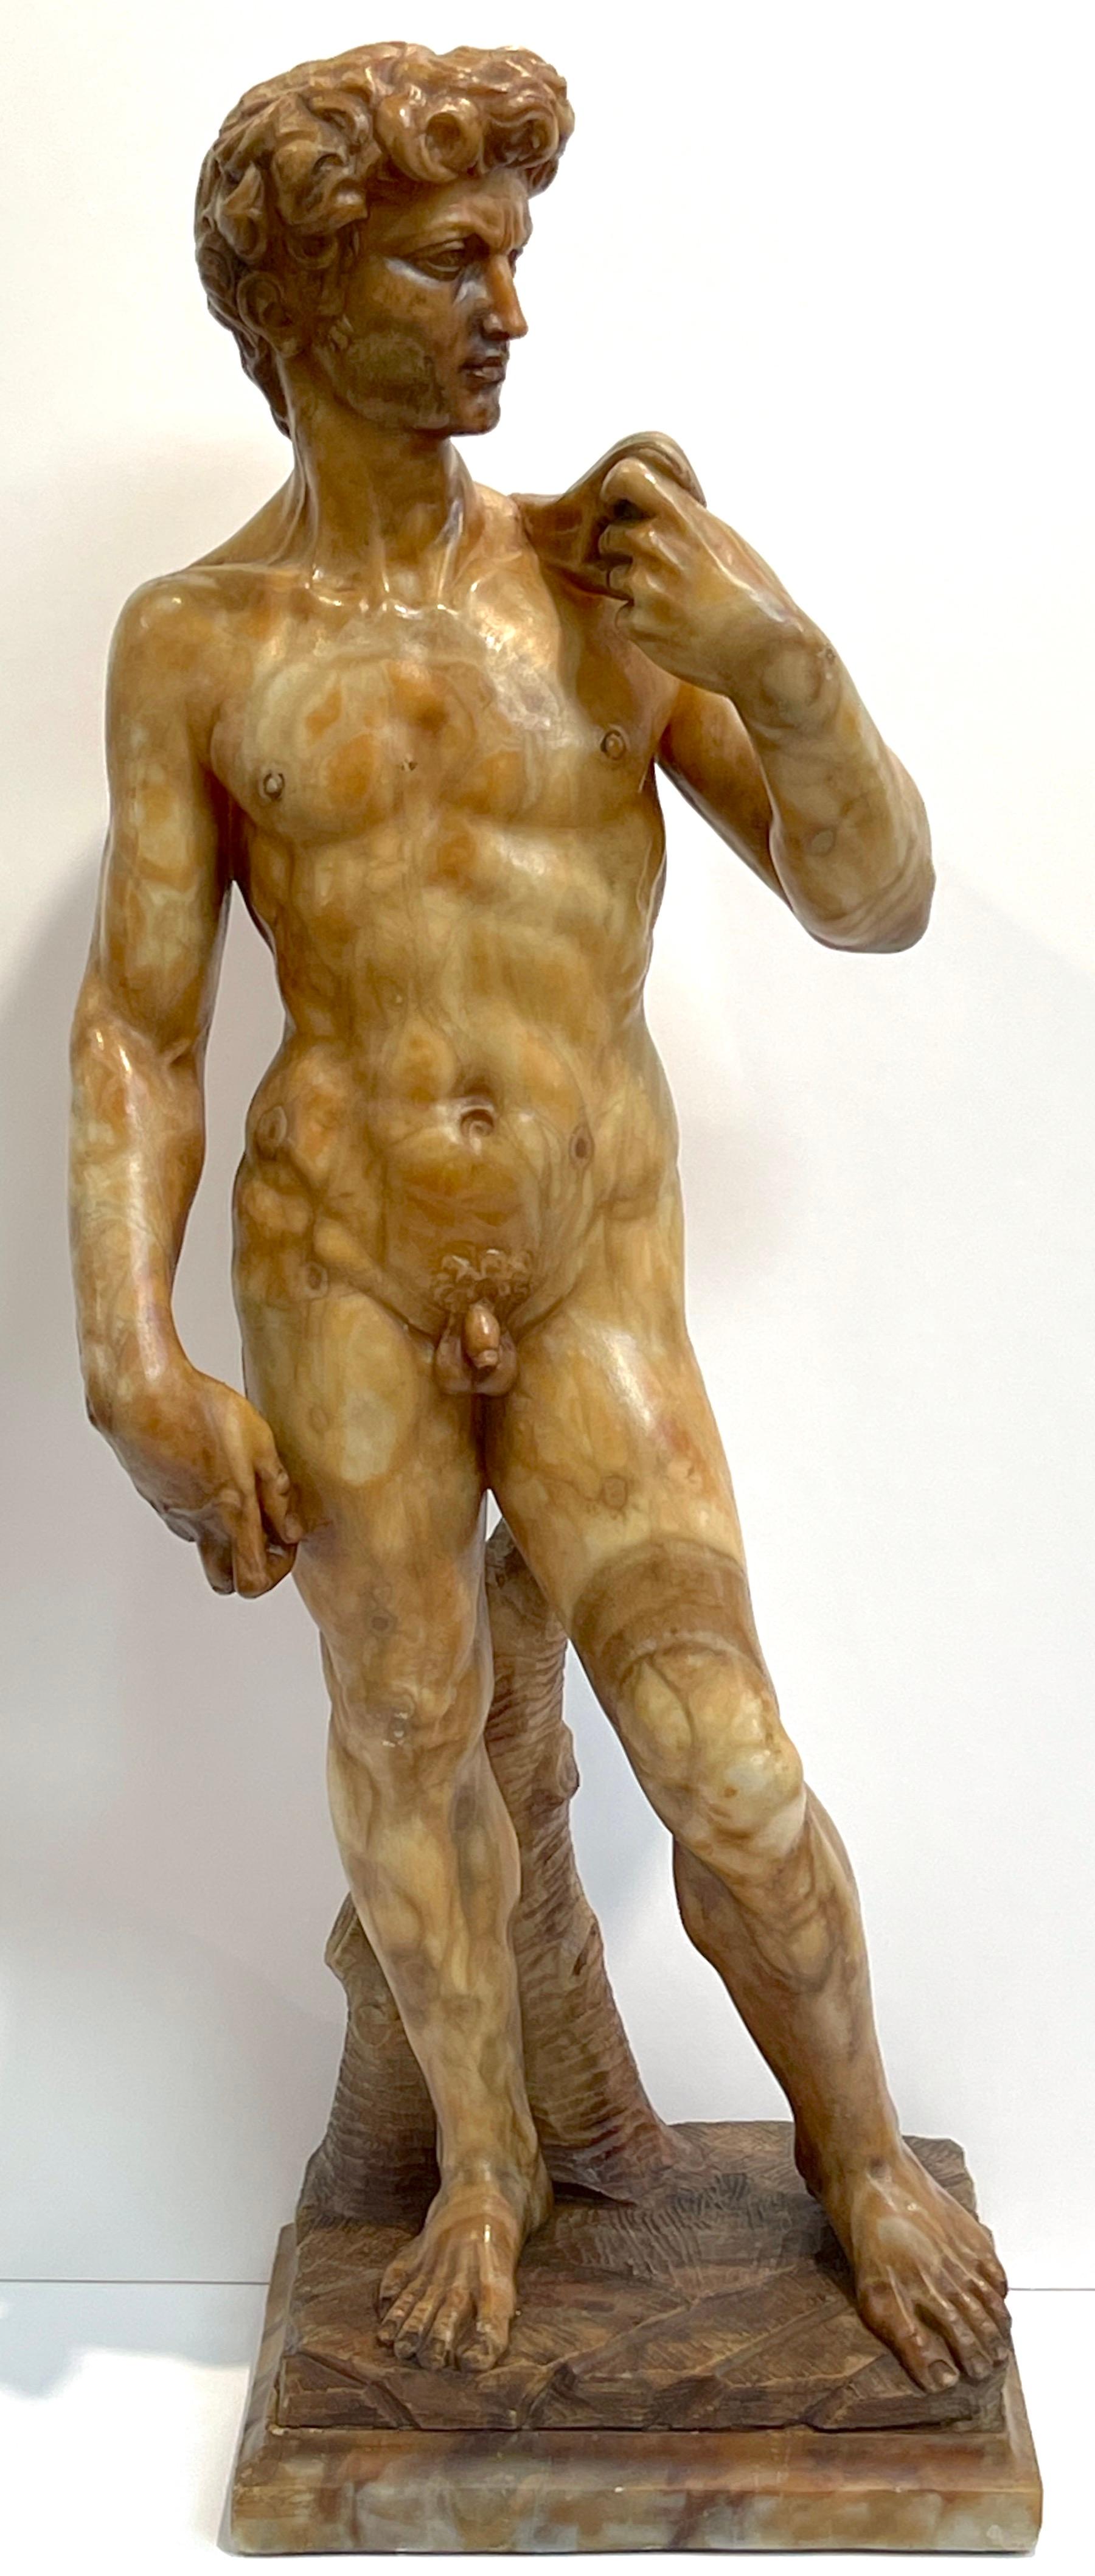 Grand Tour Tortoiseshell Quartz/Mable Sculpture of Michelangelo's David
Italy, Early 20th Century 
Add  to your collection with this magnificent Grand Tour Tortoiseshell Quartz/Marble Sculpture, a striking homage to the iconic masterpiece,